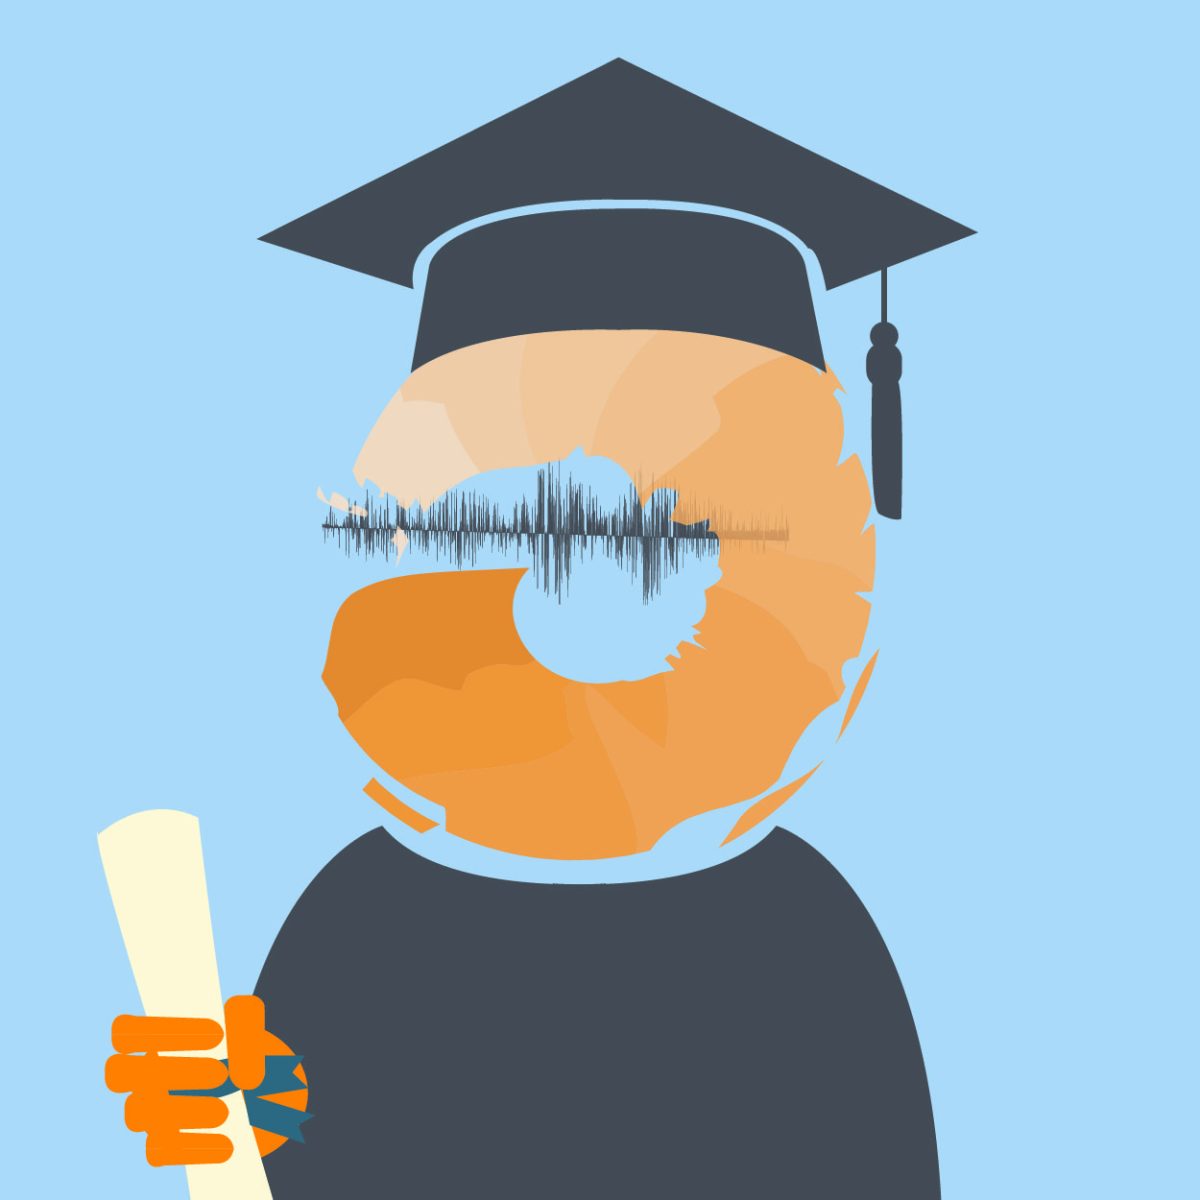 illustration of a COCC playlist icon wearing a graduation cap and gown, holding a diploma or certificate.